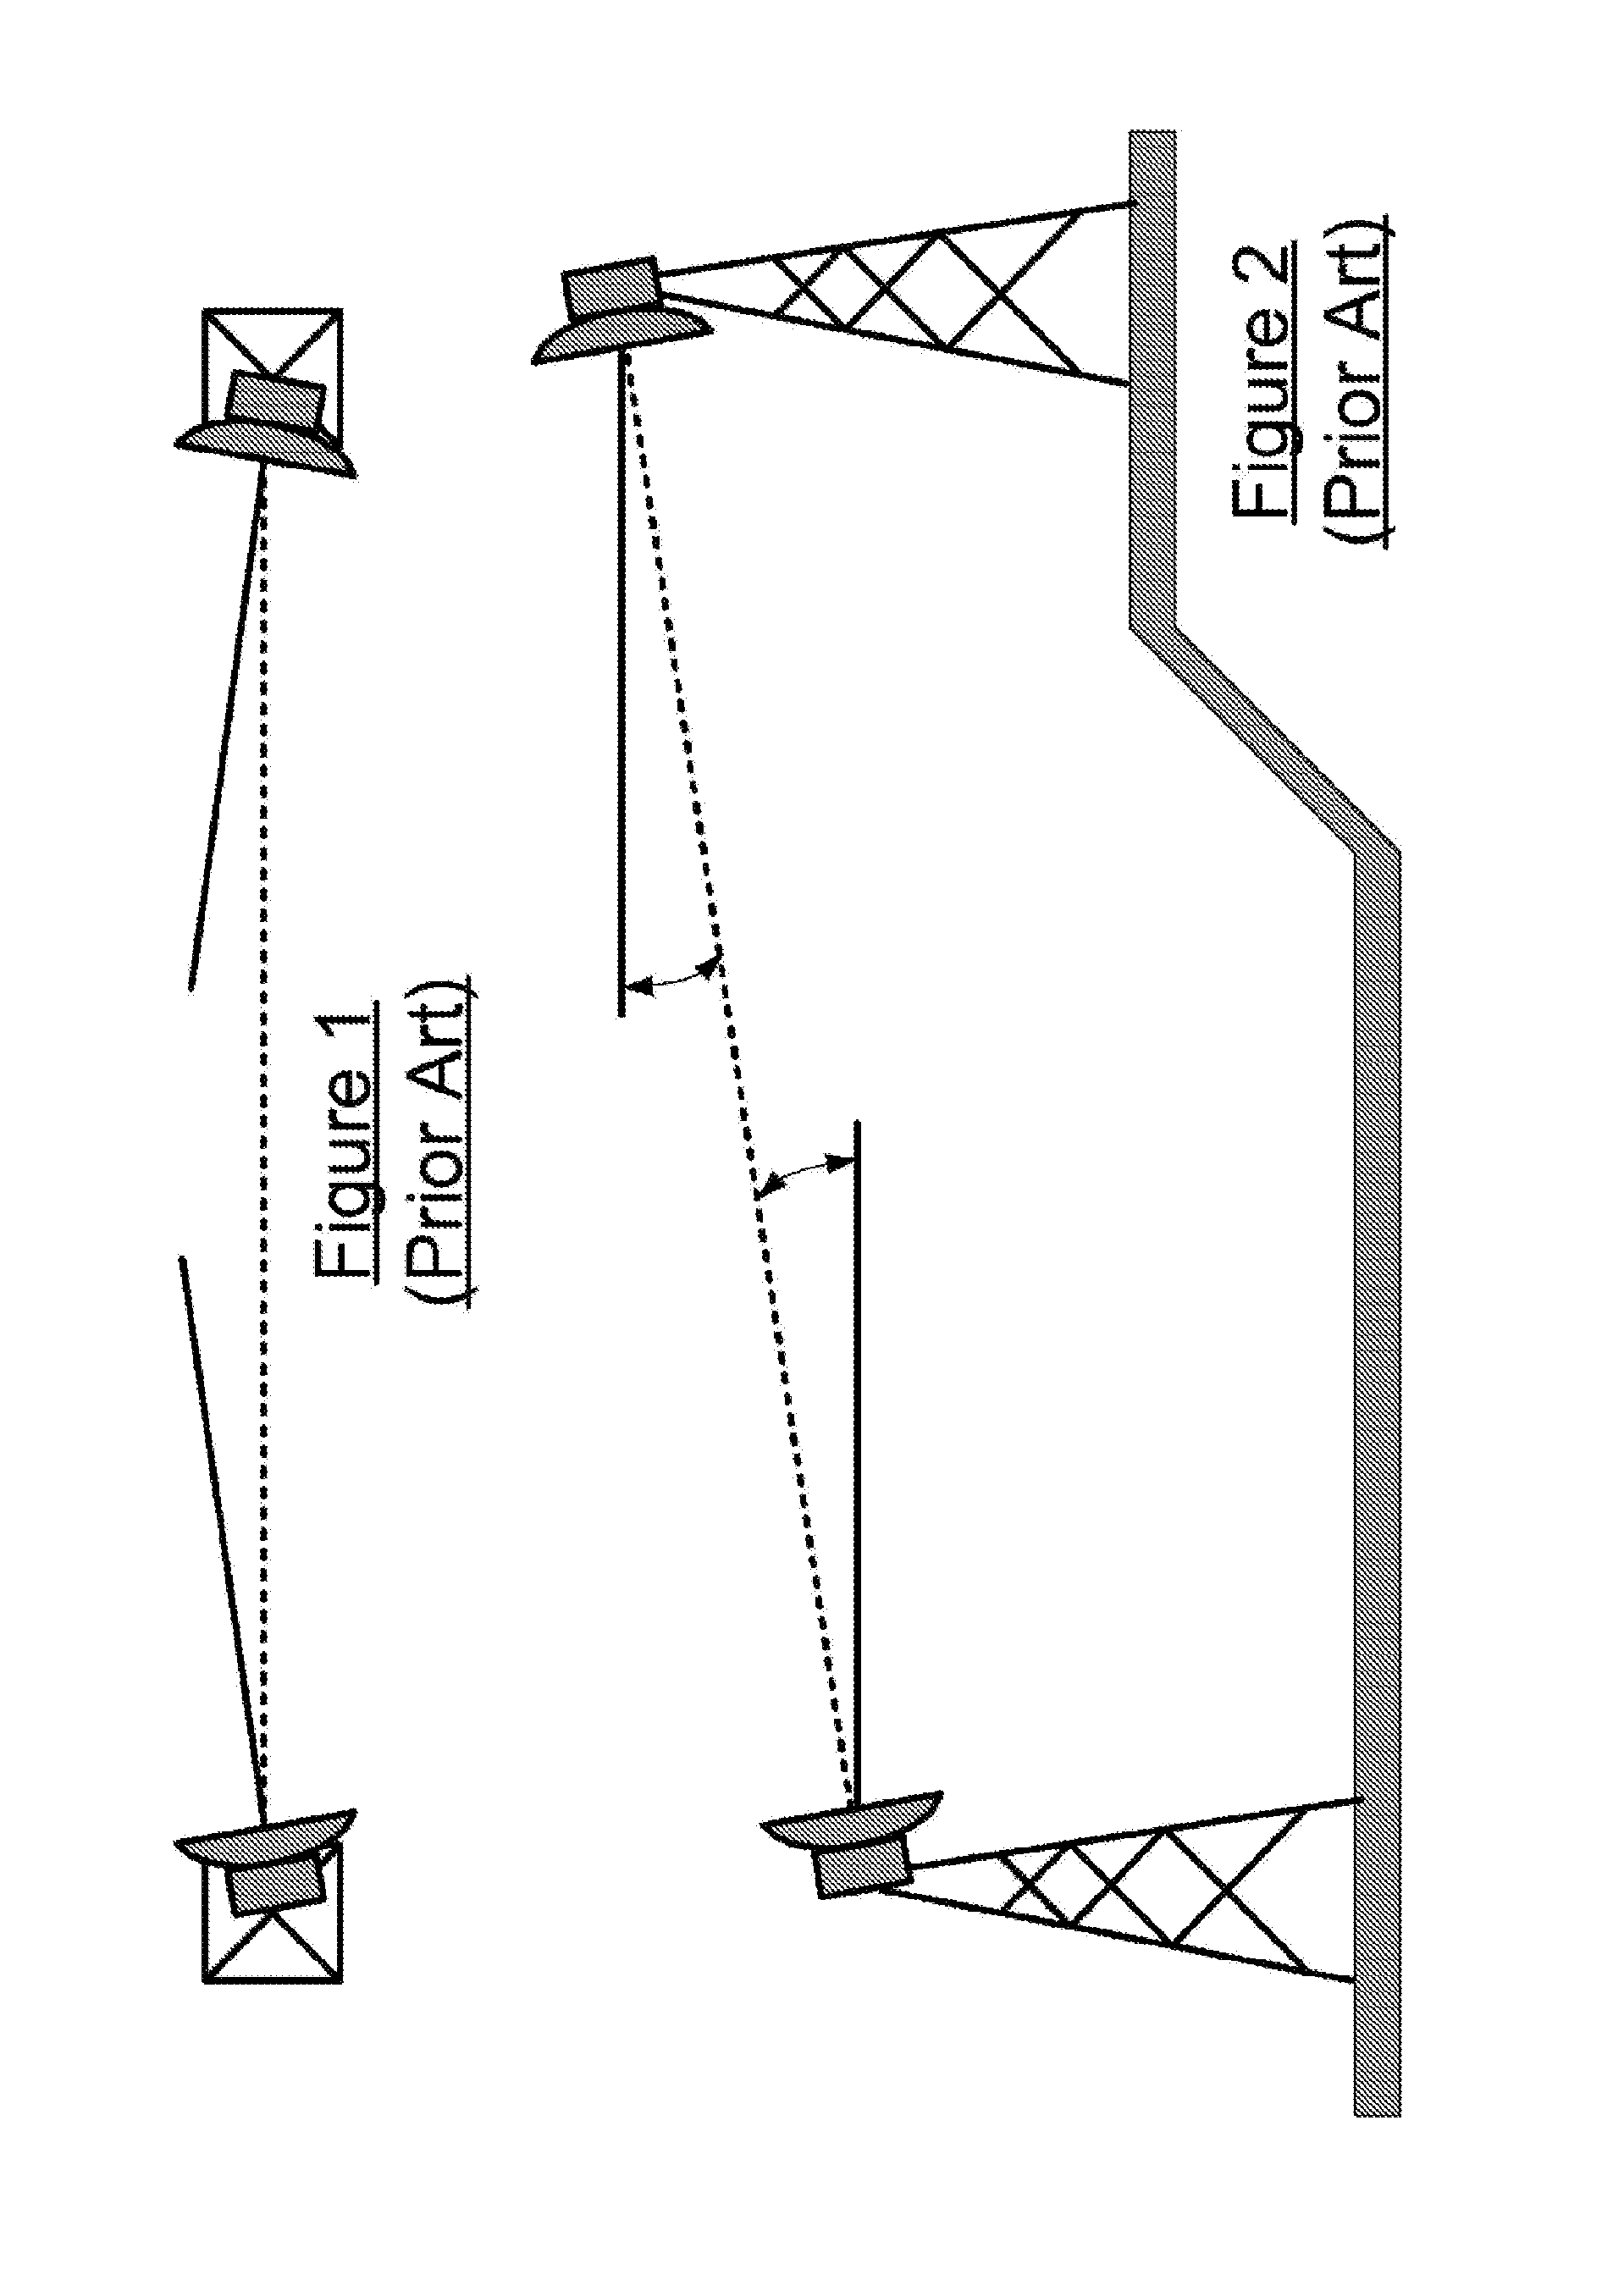 A stabilized platform for a wireless communication link